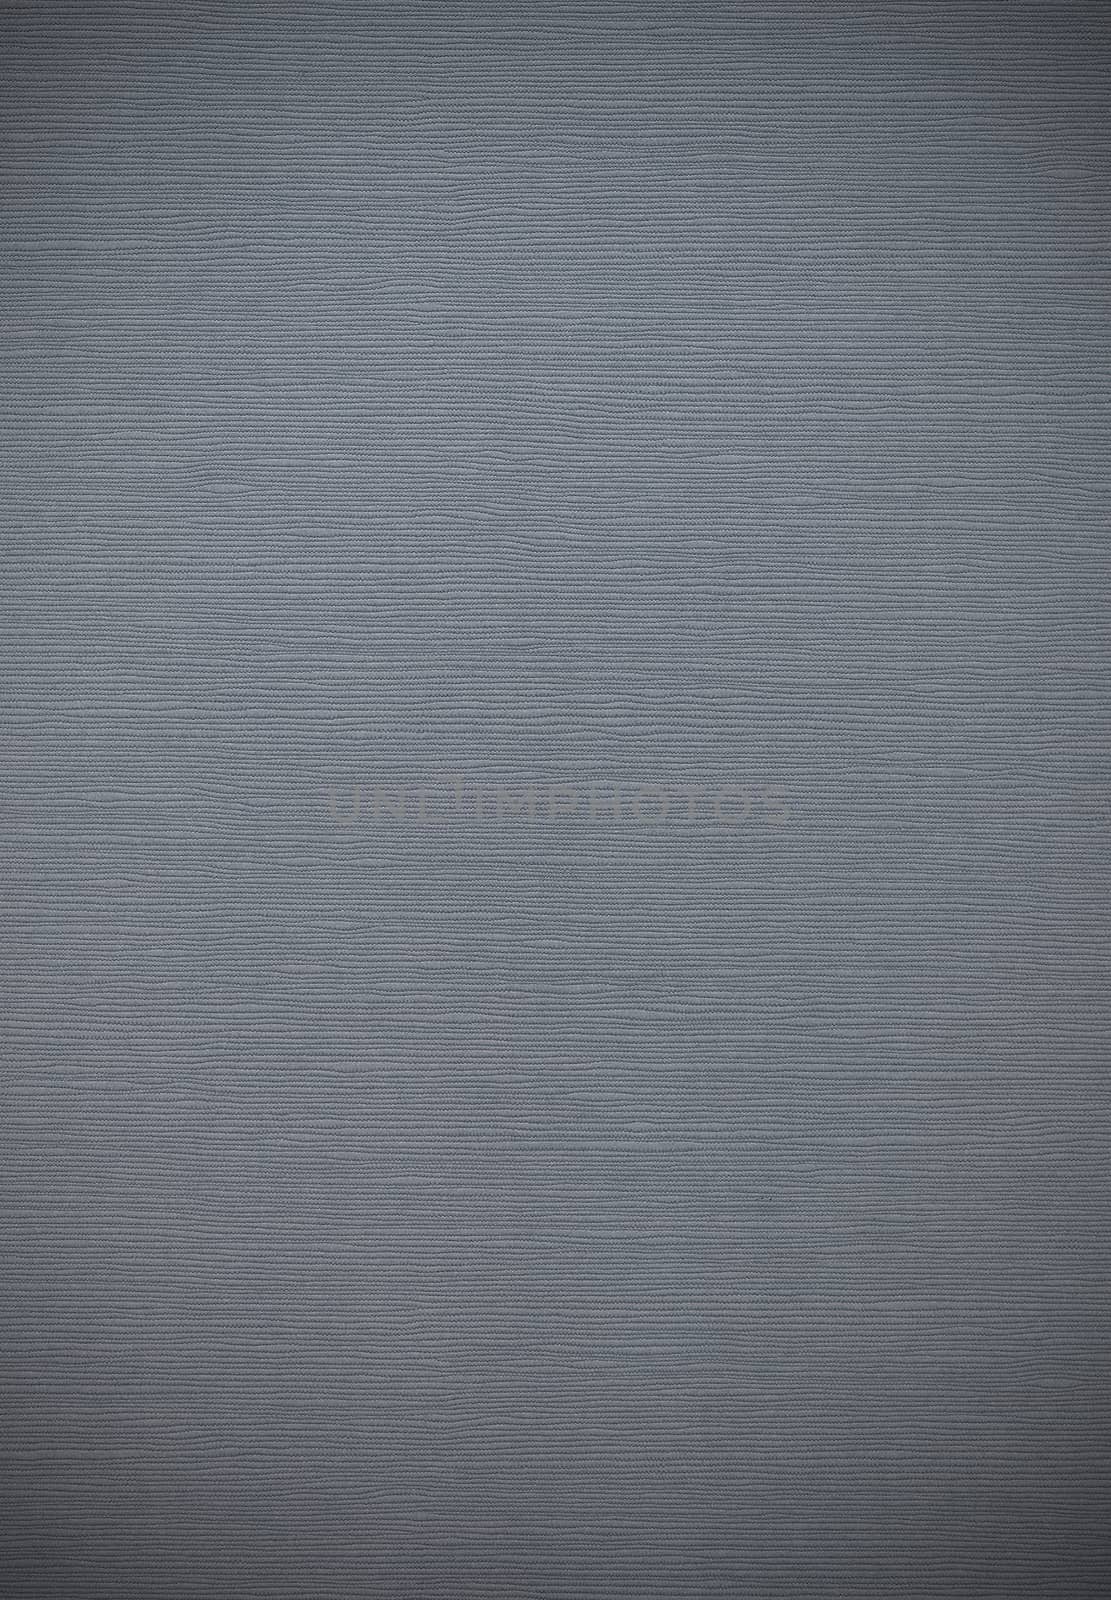 grey cotton textured paper  by simpleBE